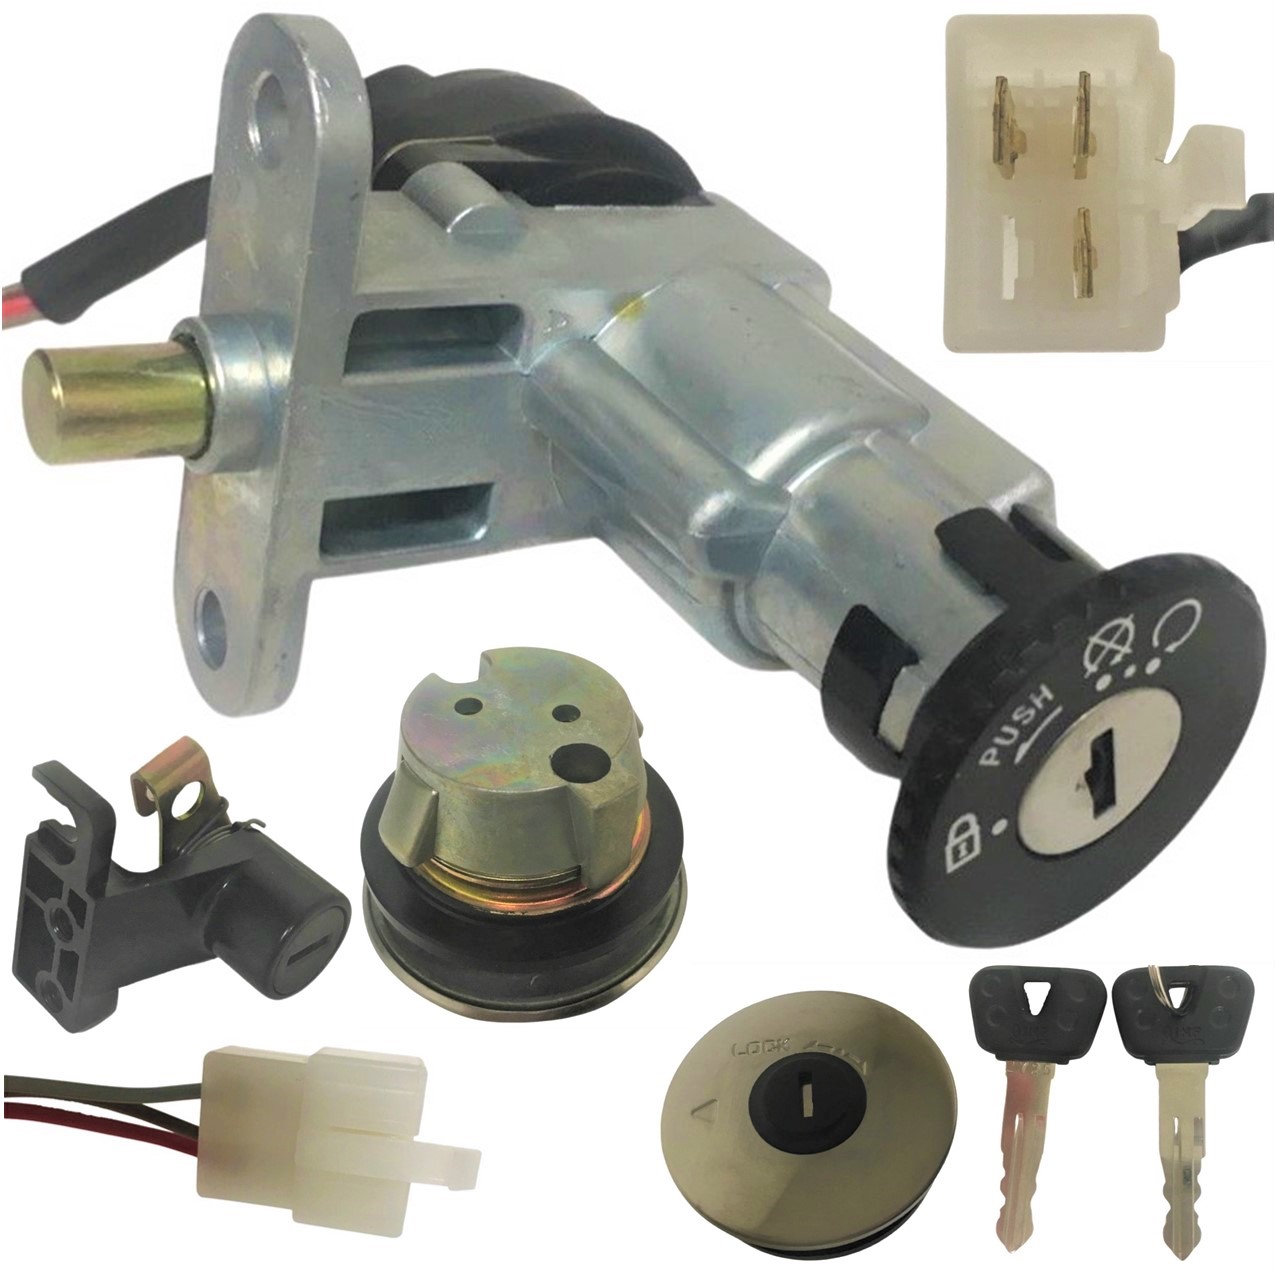 Ignition Switch Fits E-Ton Beamer 50, Matrix 50, 49cc Scooters + Others. 3 Pins in 4 Pin FM Jack Bolt holes Ctr to Ctr= 50mm